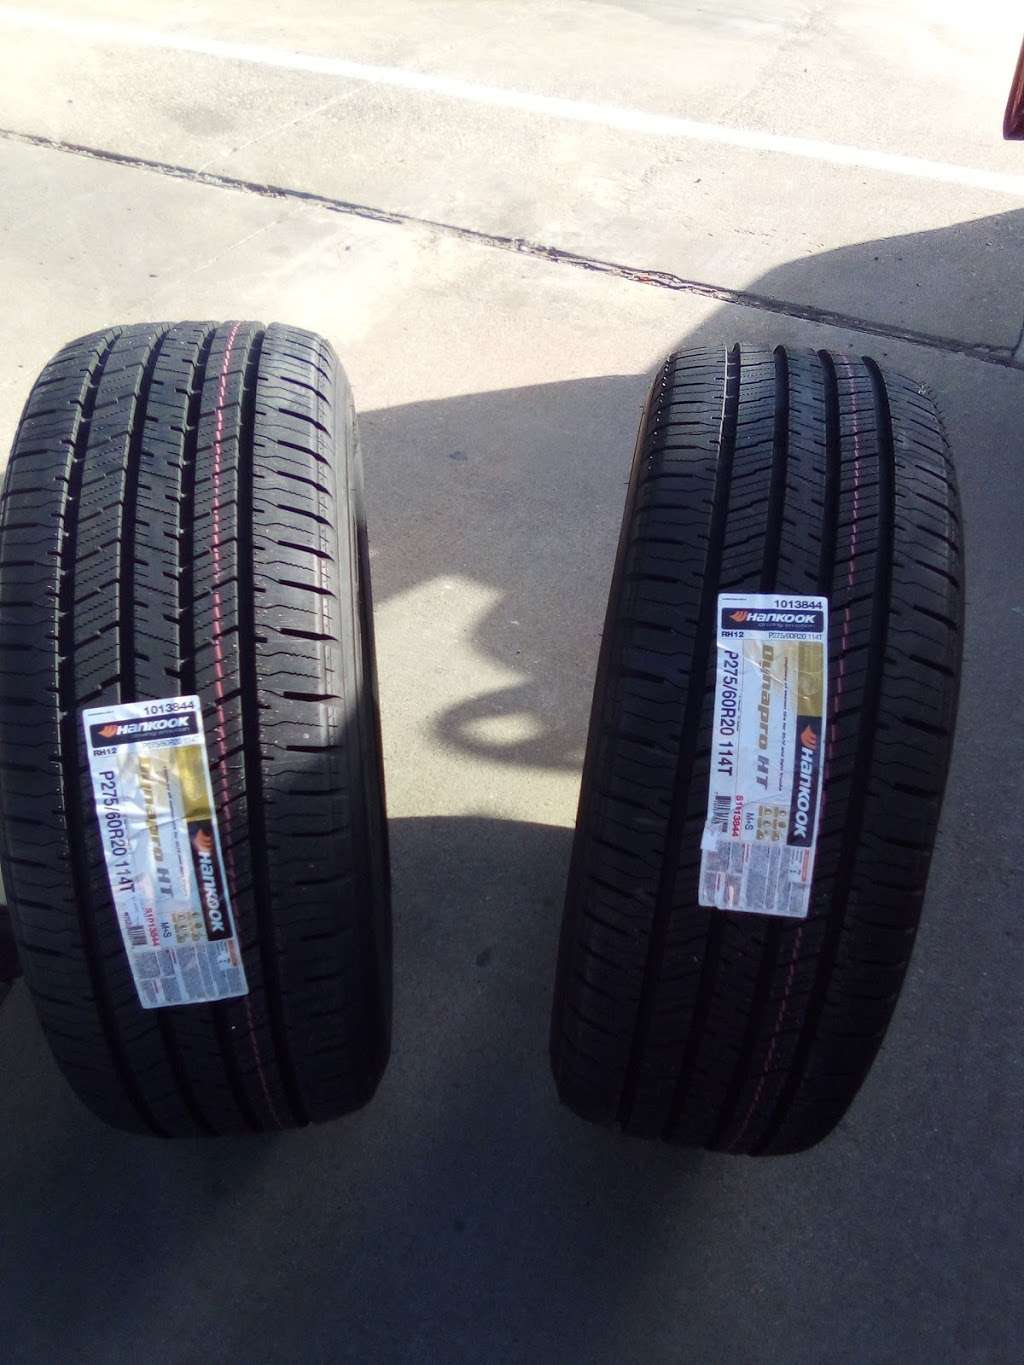 Dynamic tire,wheel Balancing an regrooving/ Mobile Services | 12212 Duke Dr, Balch Springs, TX 75180, USA | Phone: (214) 315-7350